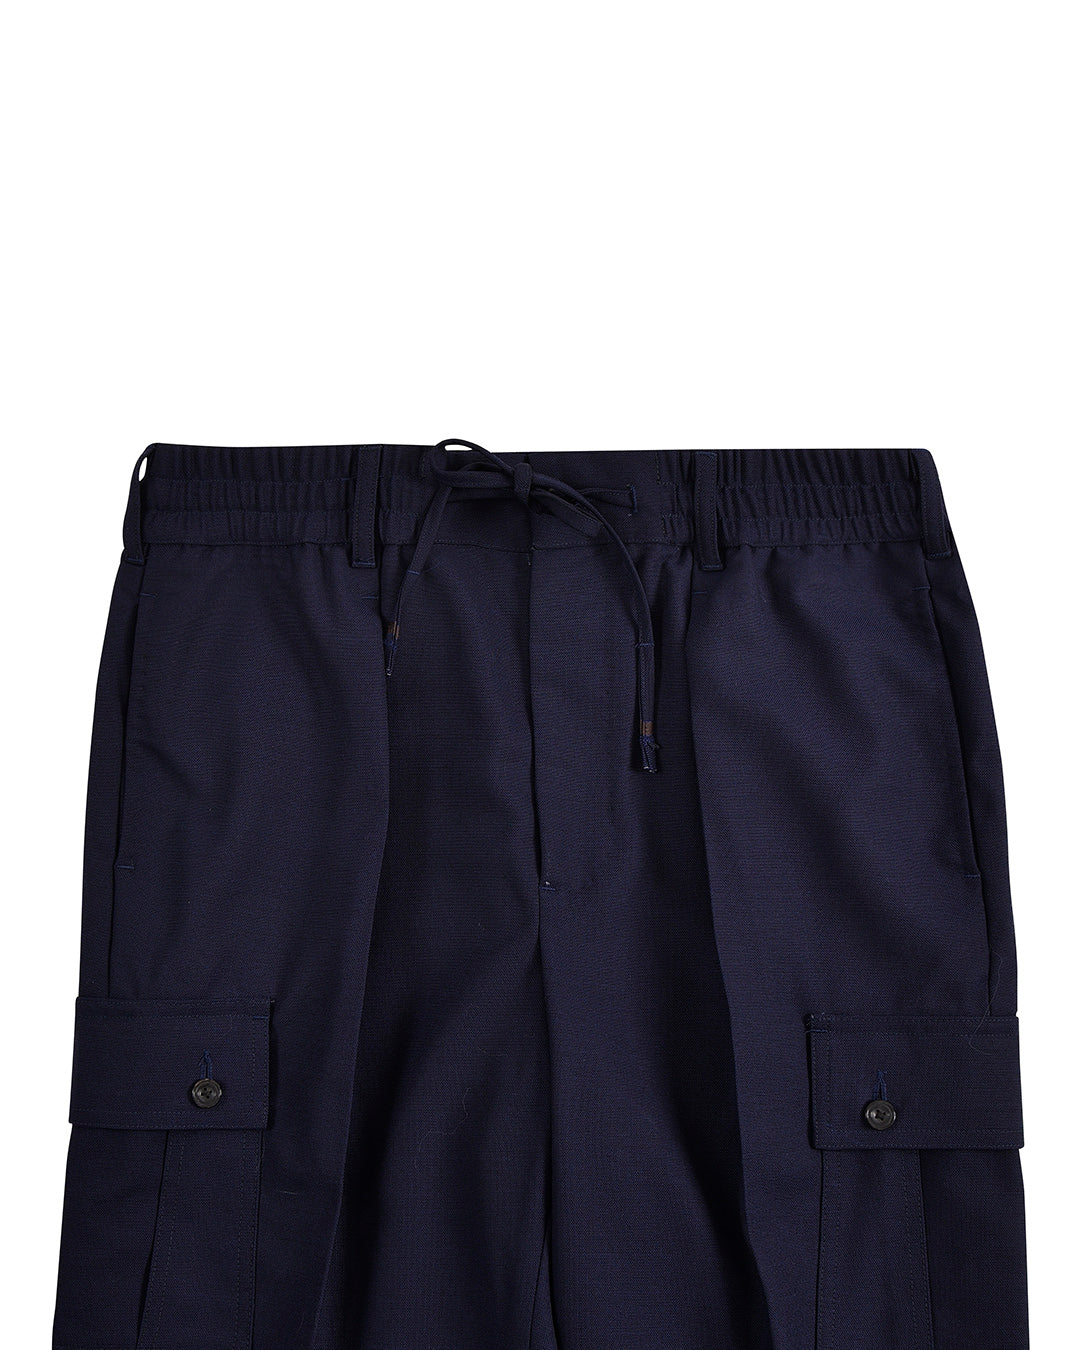 VBC - 4 Ply Tropical Wool: Navy Cargo Pant